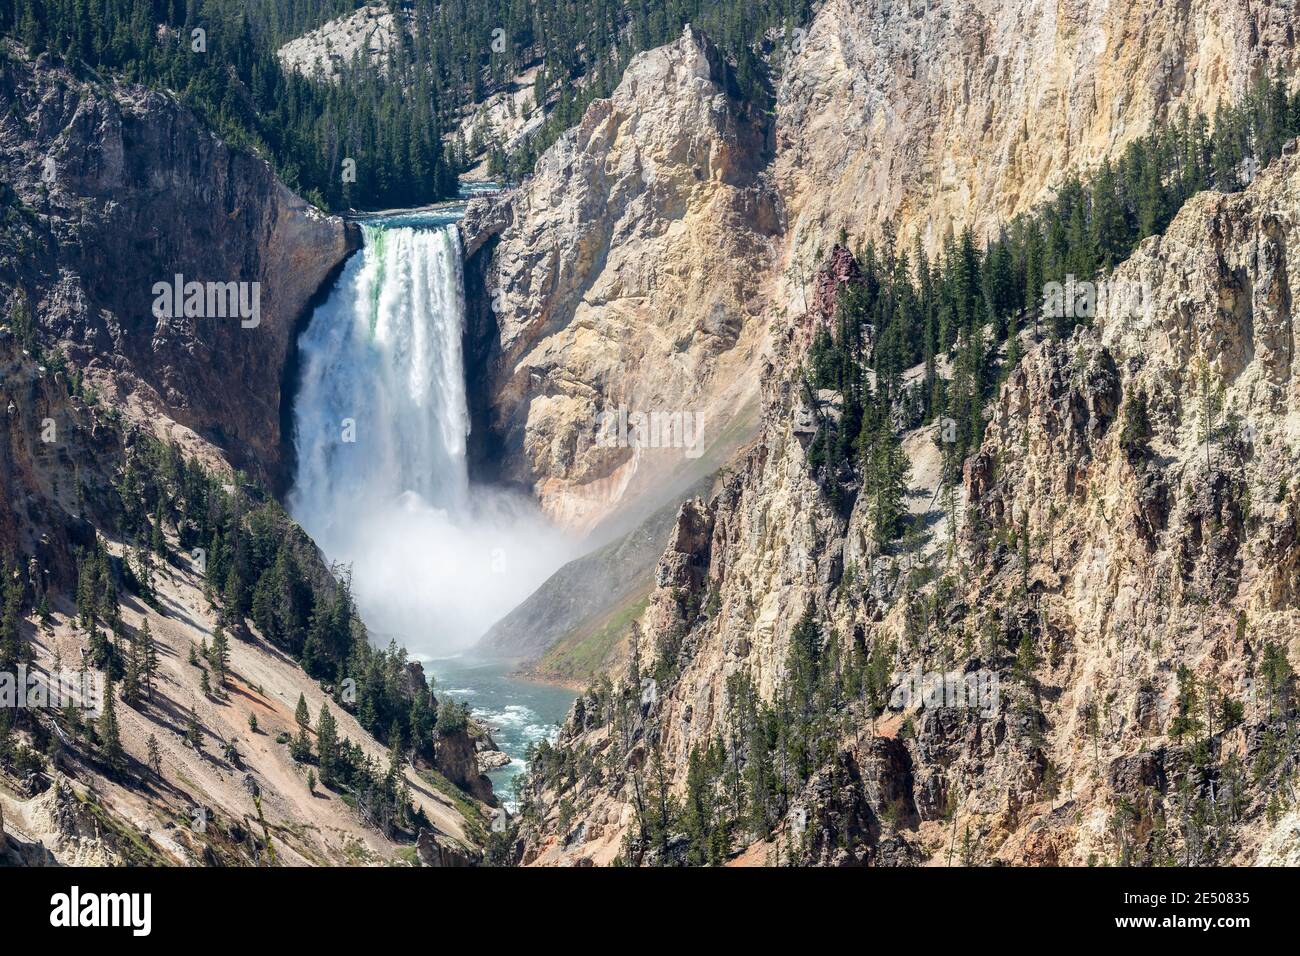 Lower Falls depuis Artist's point, Grand Canyon of the Yellowstone, parc national de Yellowstone, Wyoming, États-Unis Banque D'Images